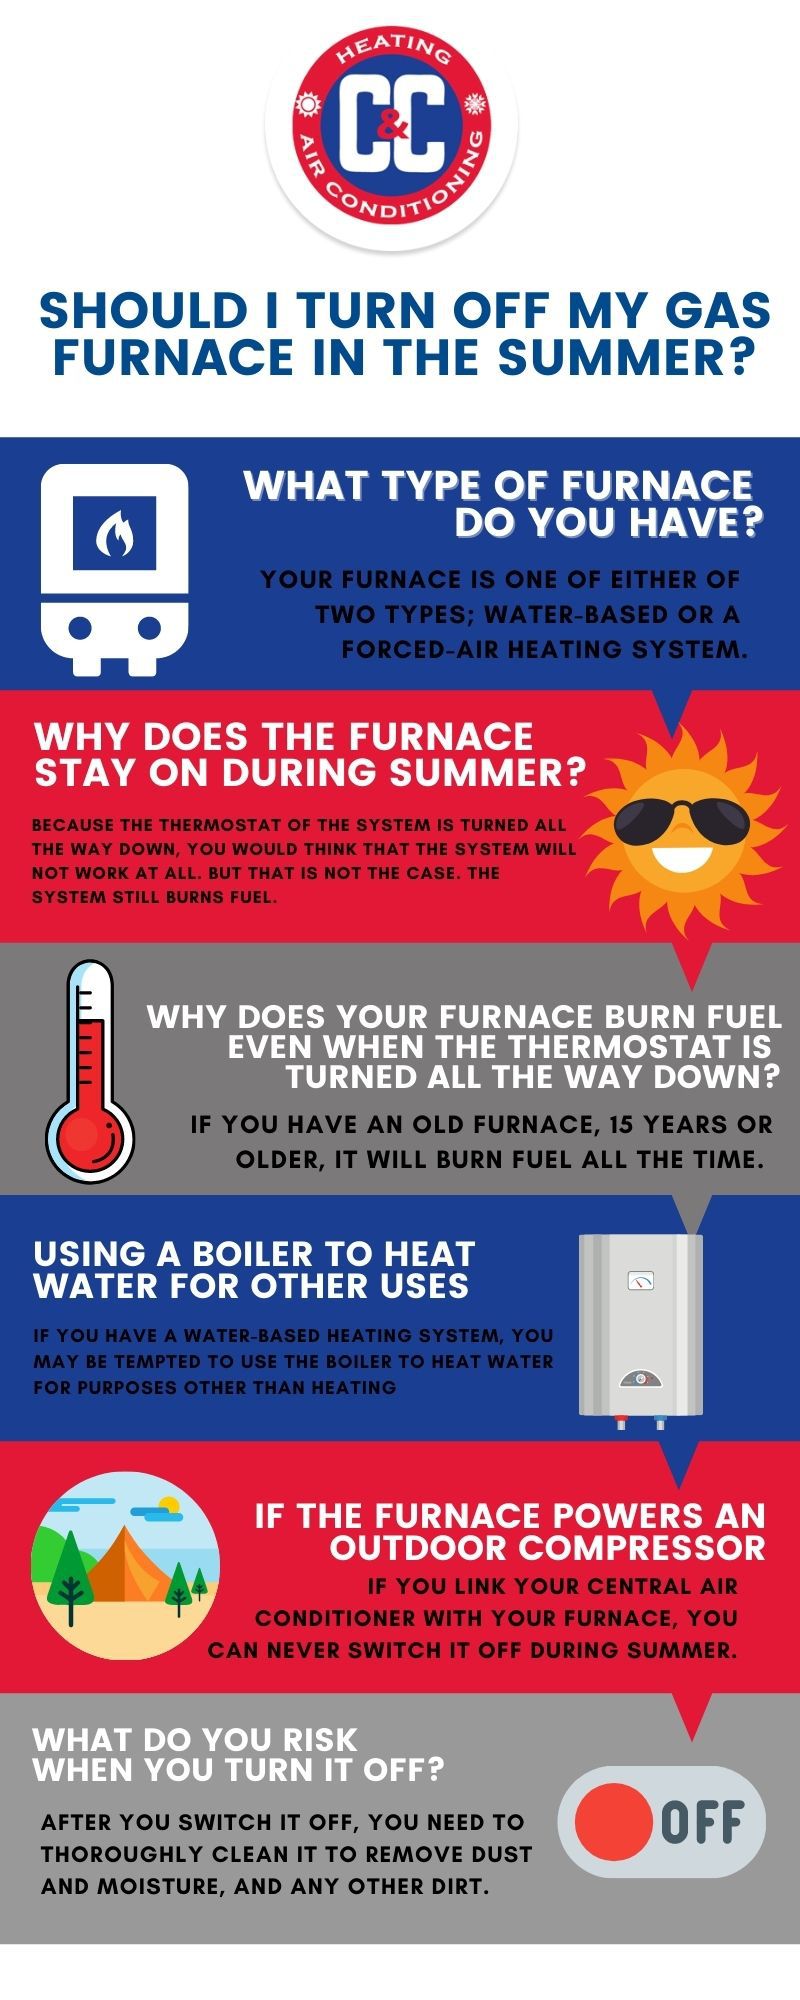 Should I Turn Off My Gas Furnace in the Summer?